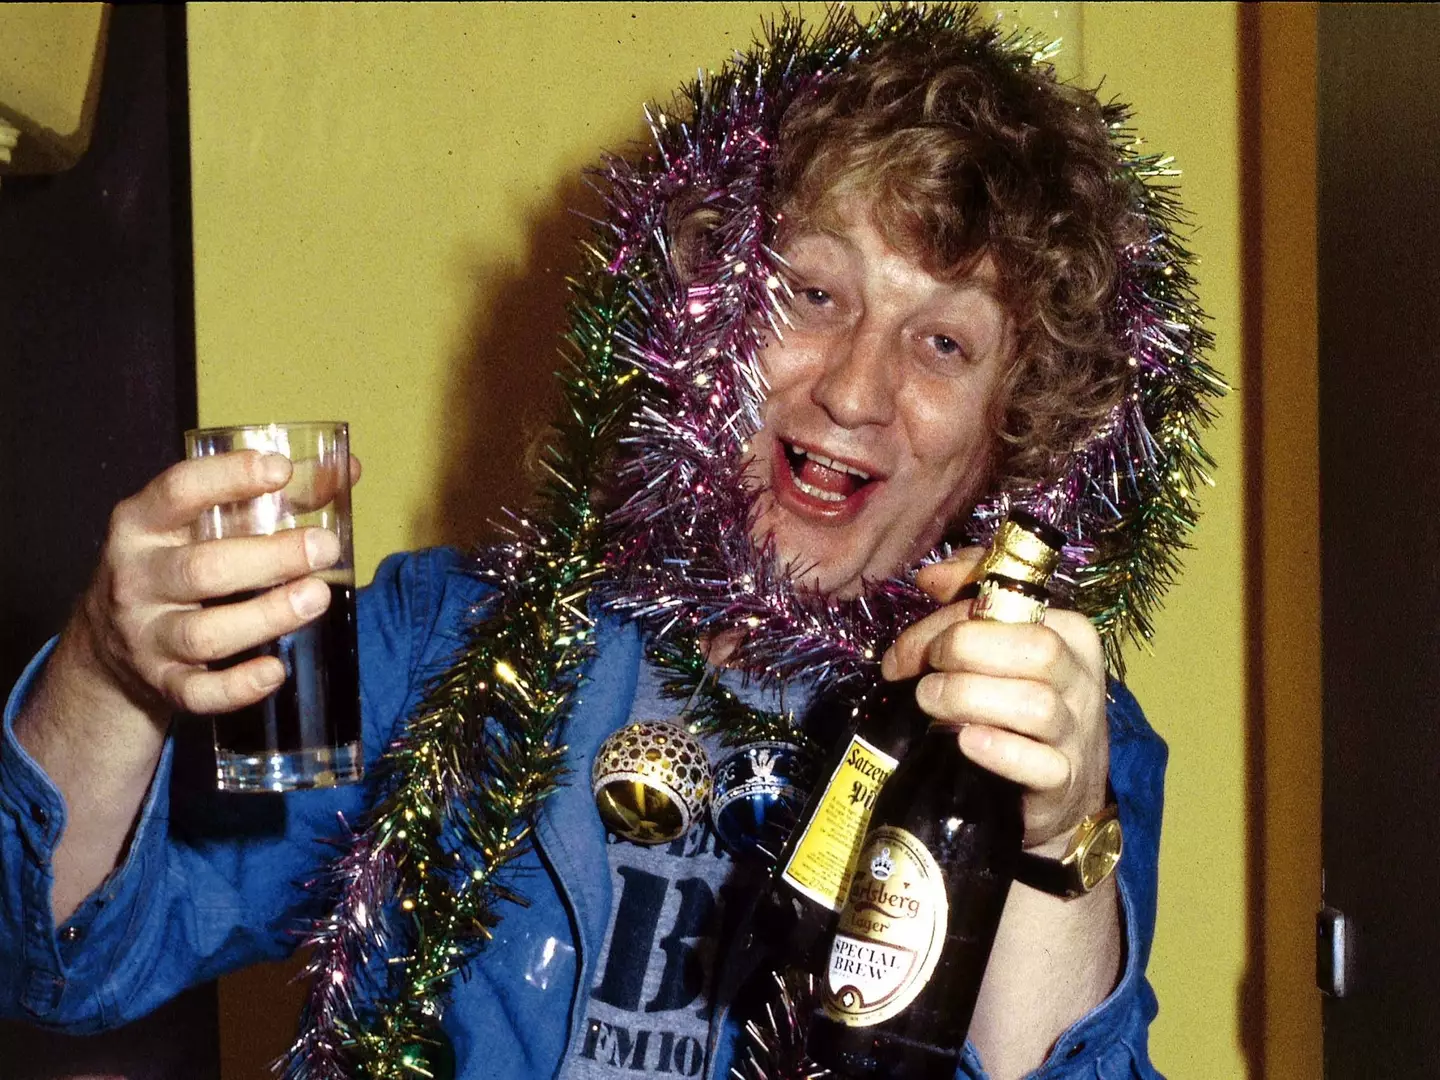 Noddy Holder's song Merry Xmas Everybody is a Christmas classic.